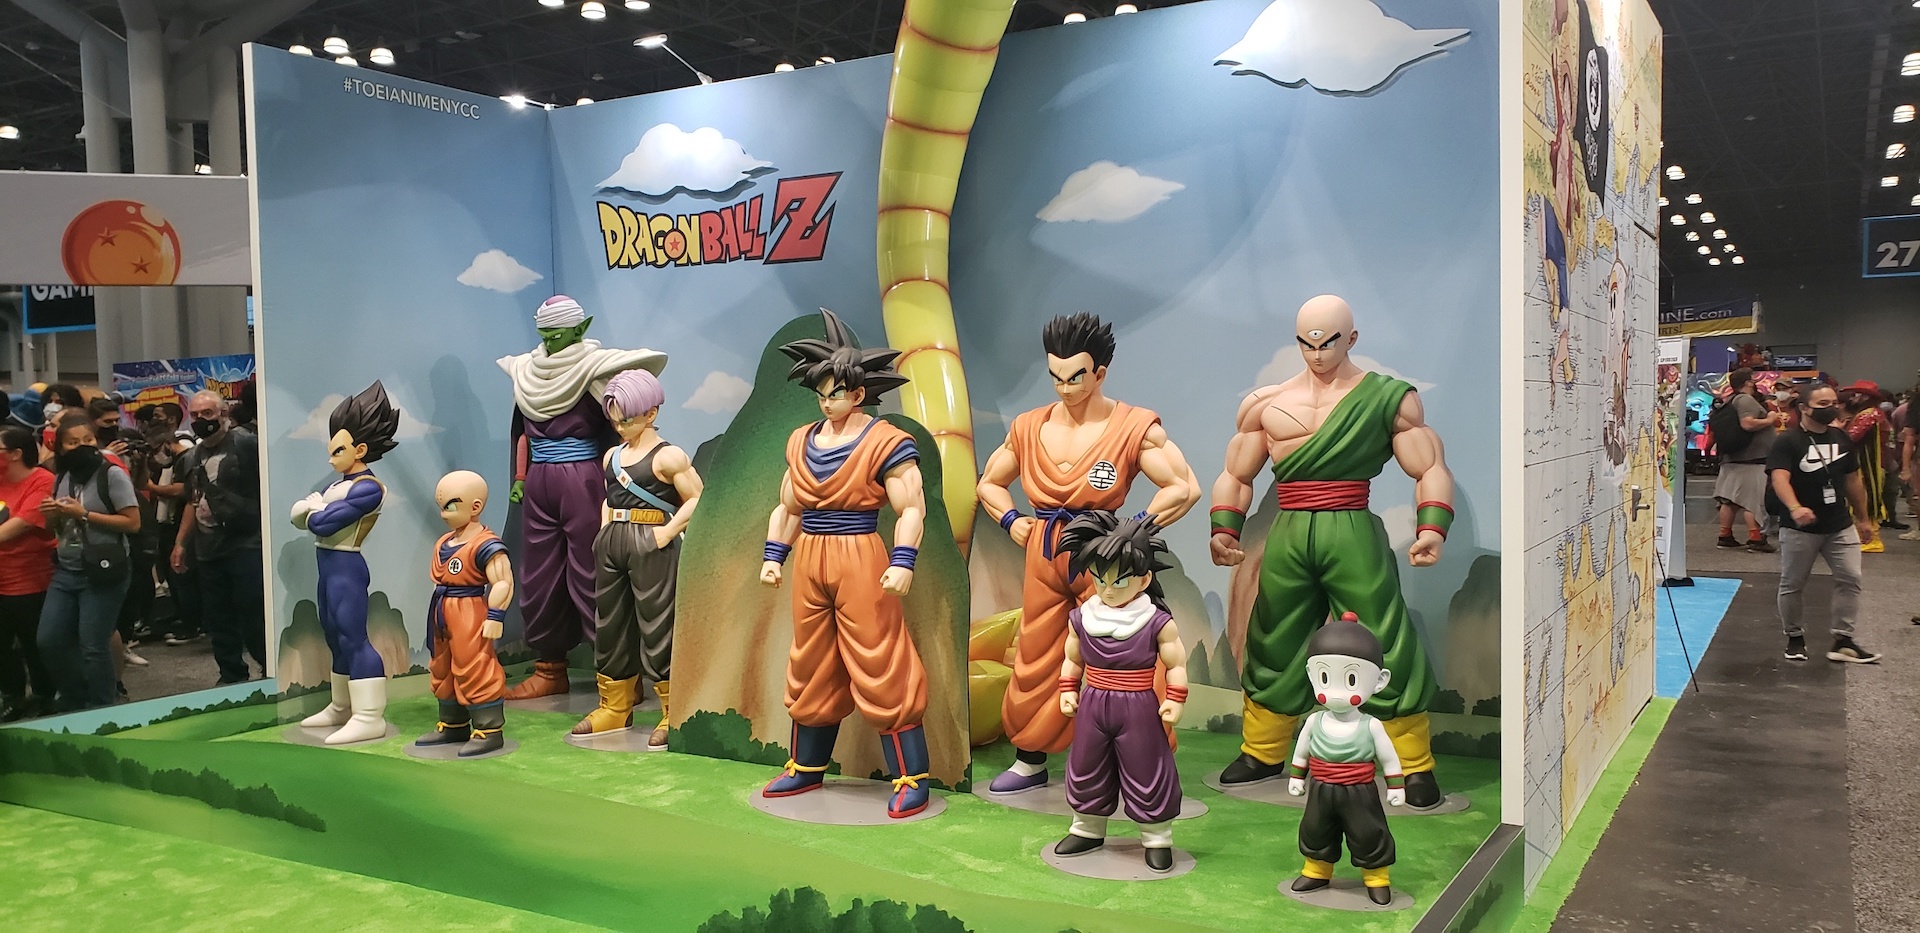 NYCC '21: All the toys at the Dragon Ball Super booth